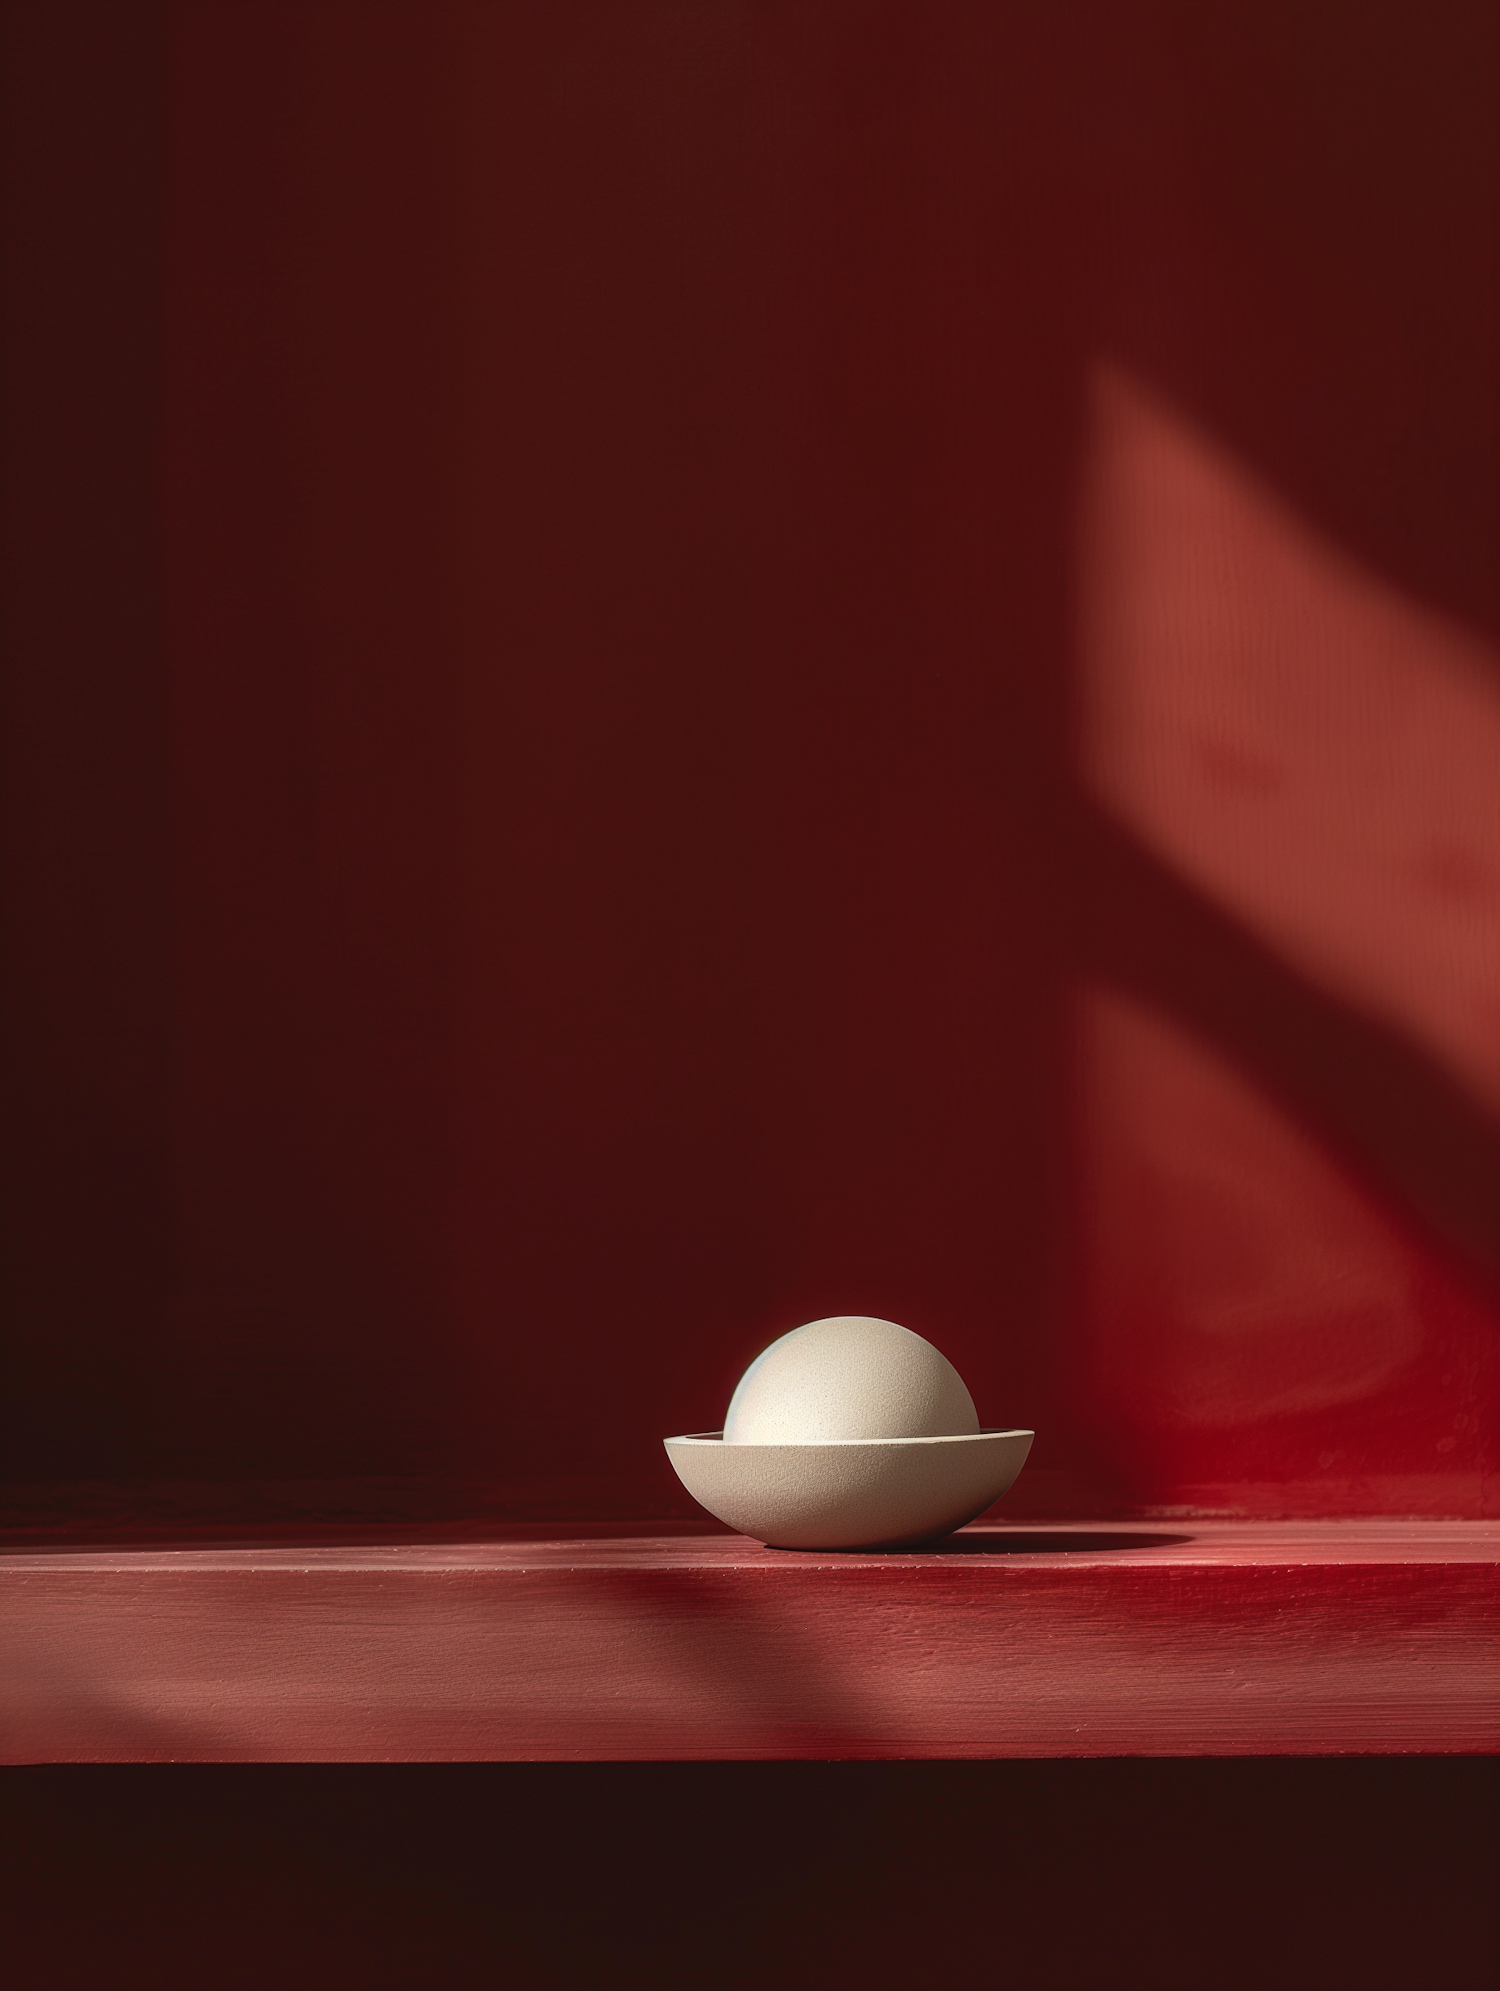 Minimalist Composition with Spherical Object